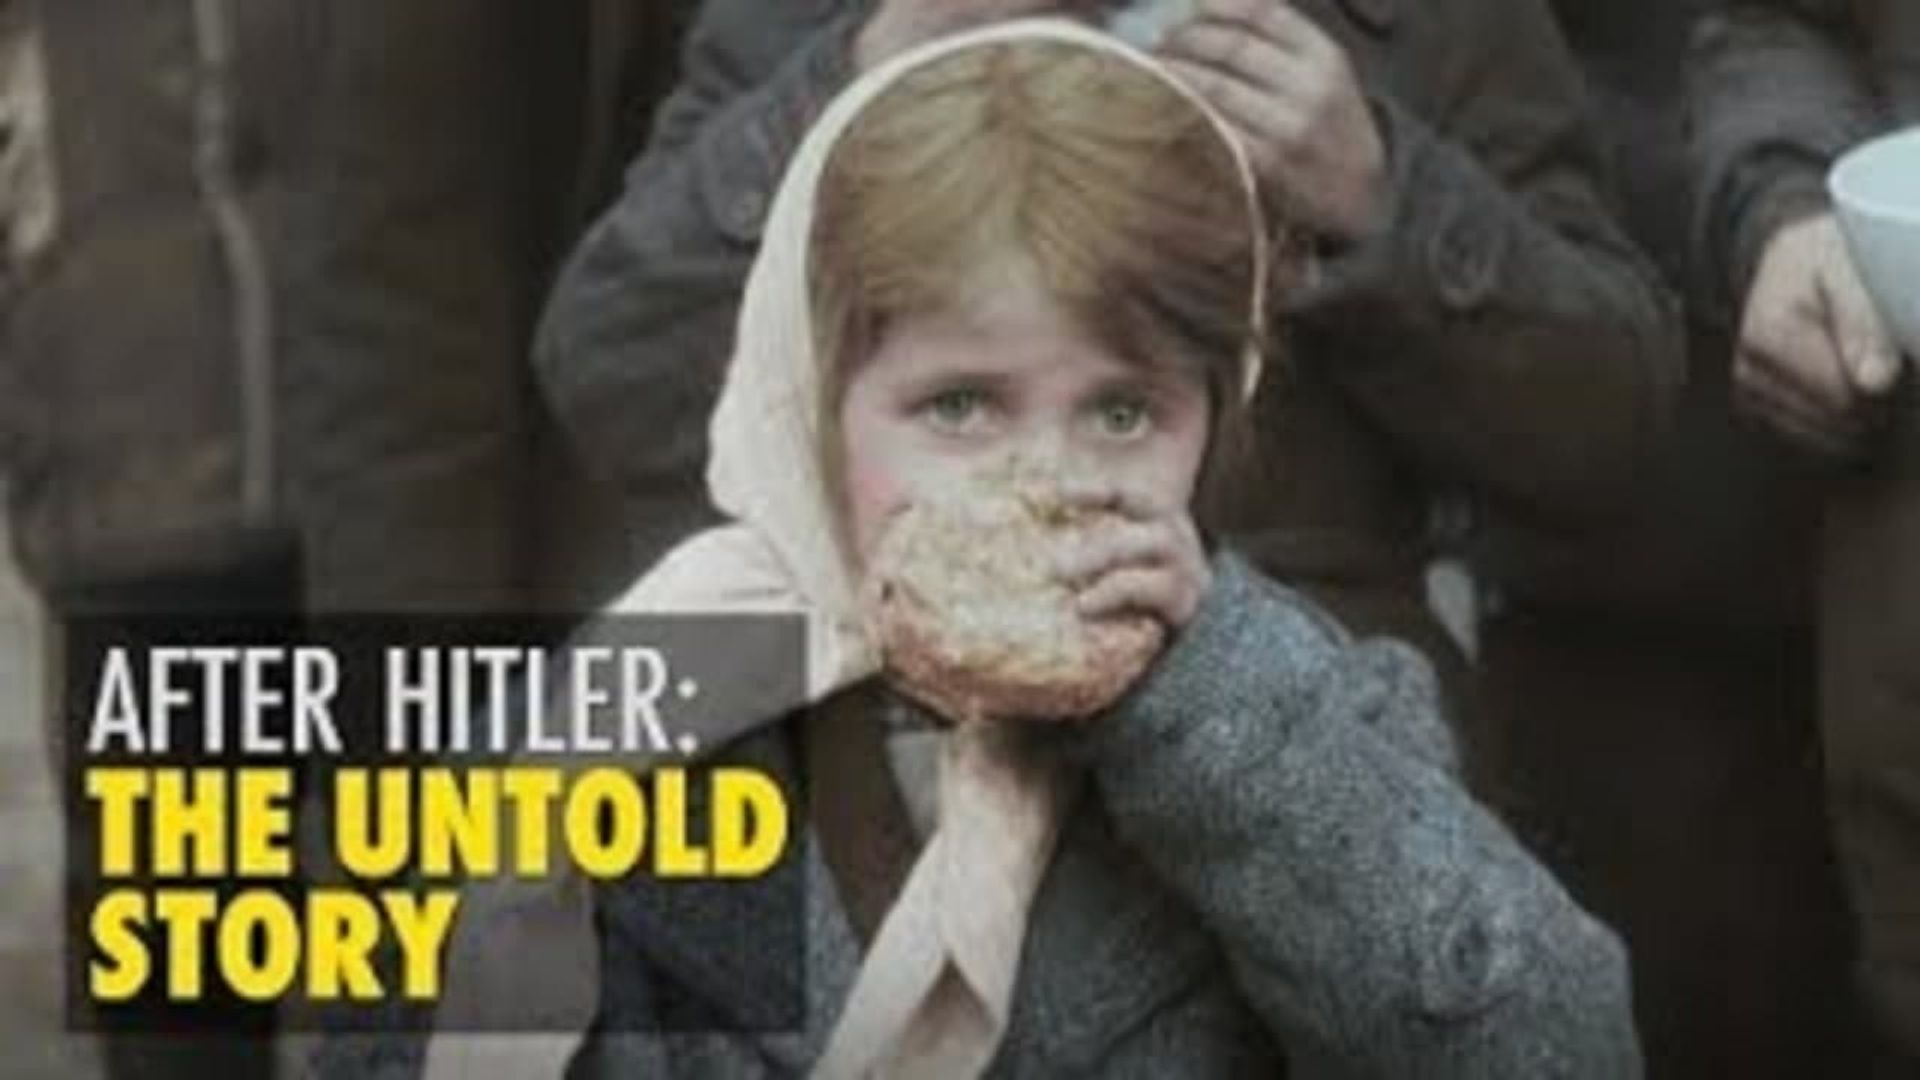 After Hitler: The Untold Story background